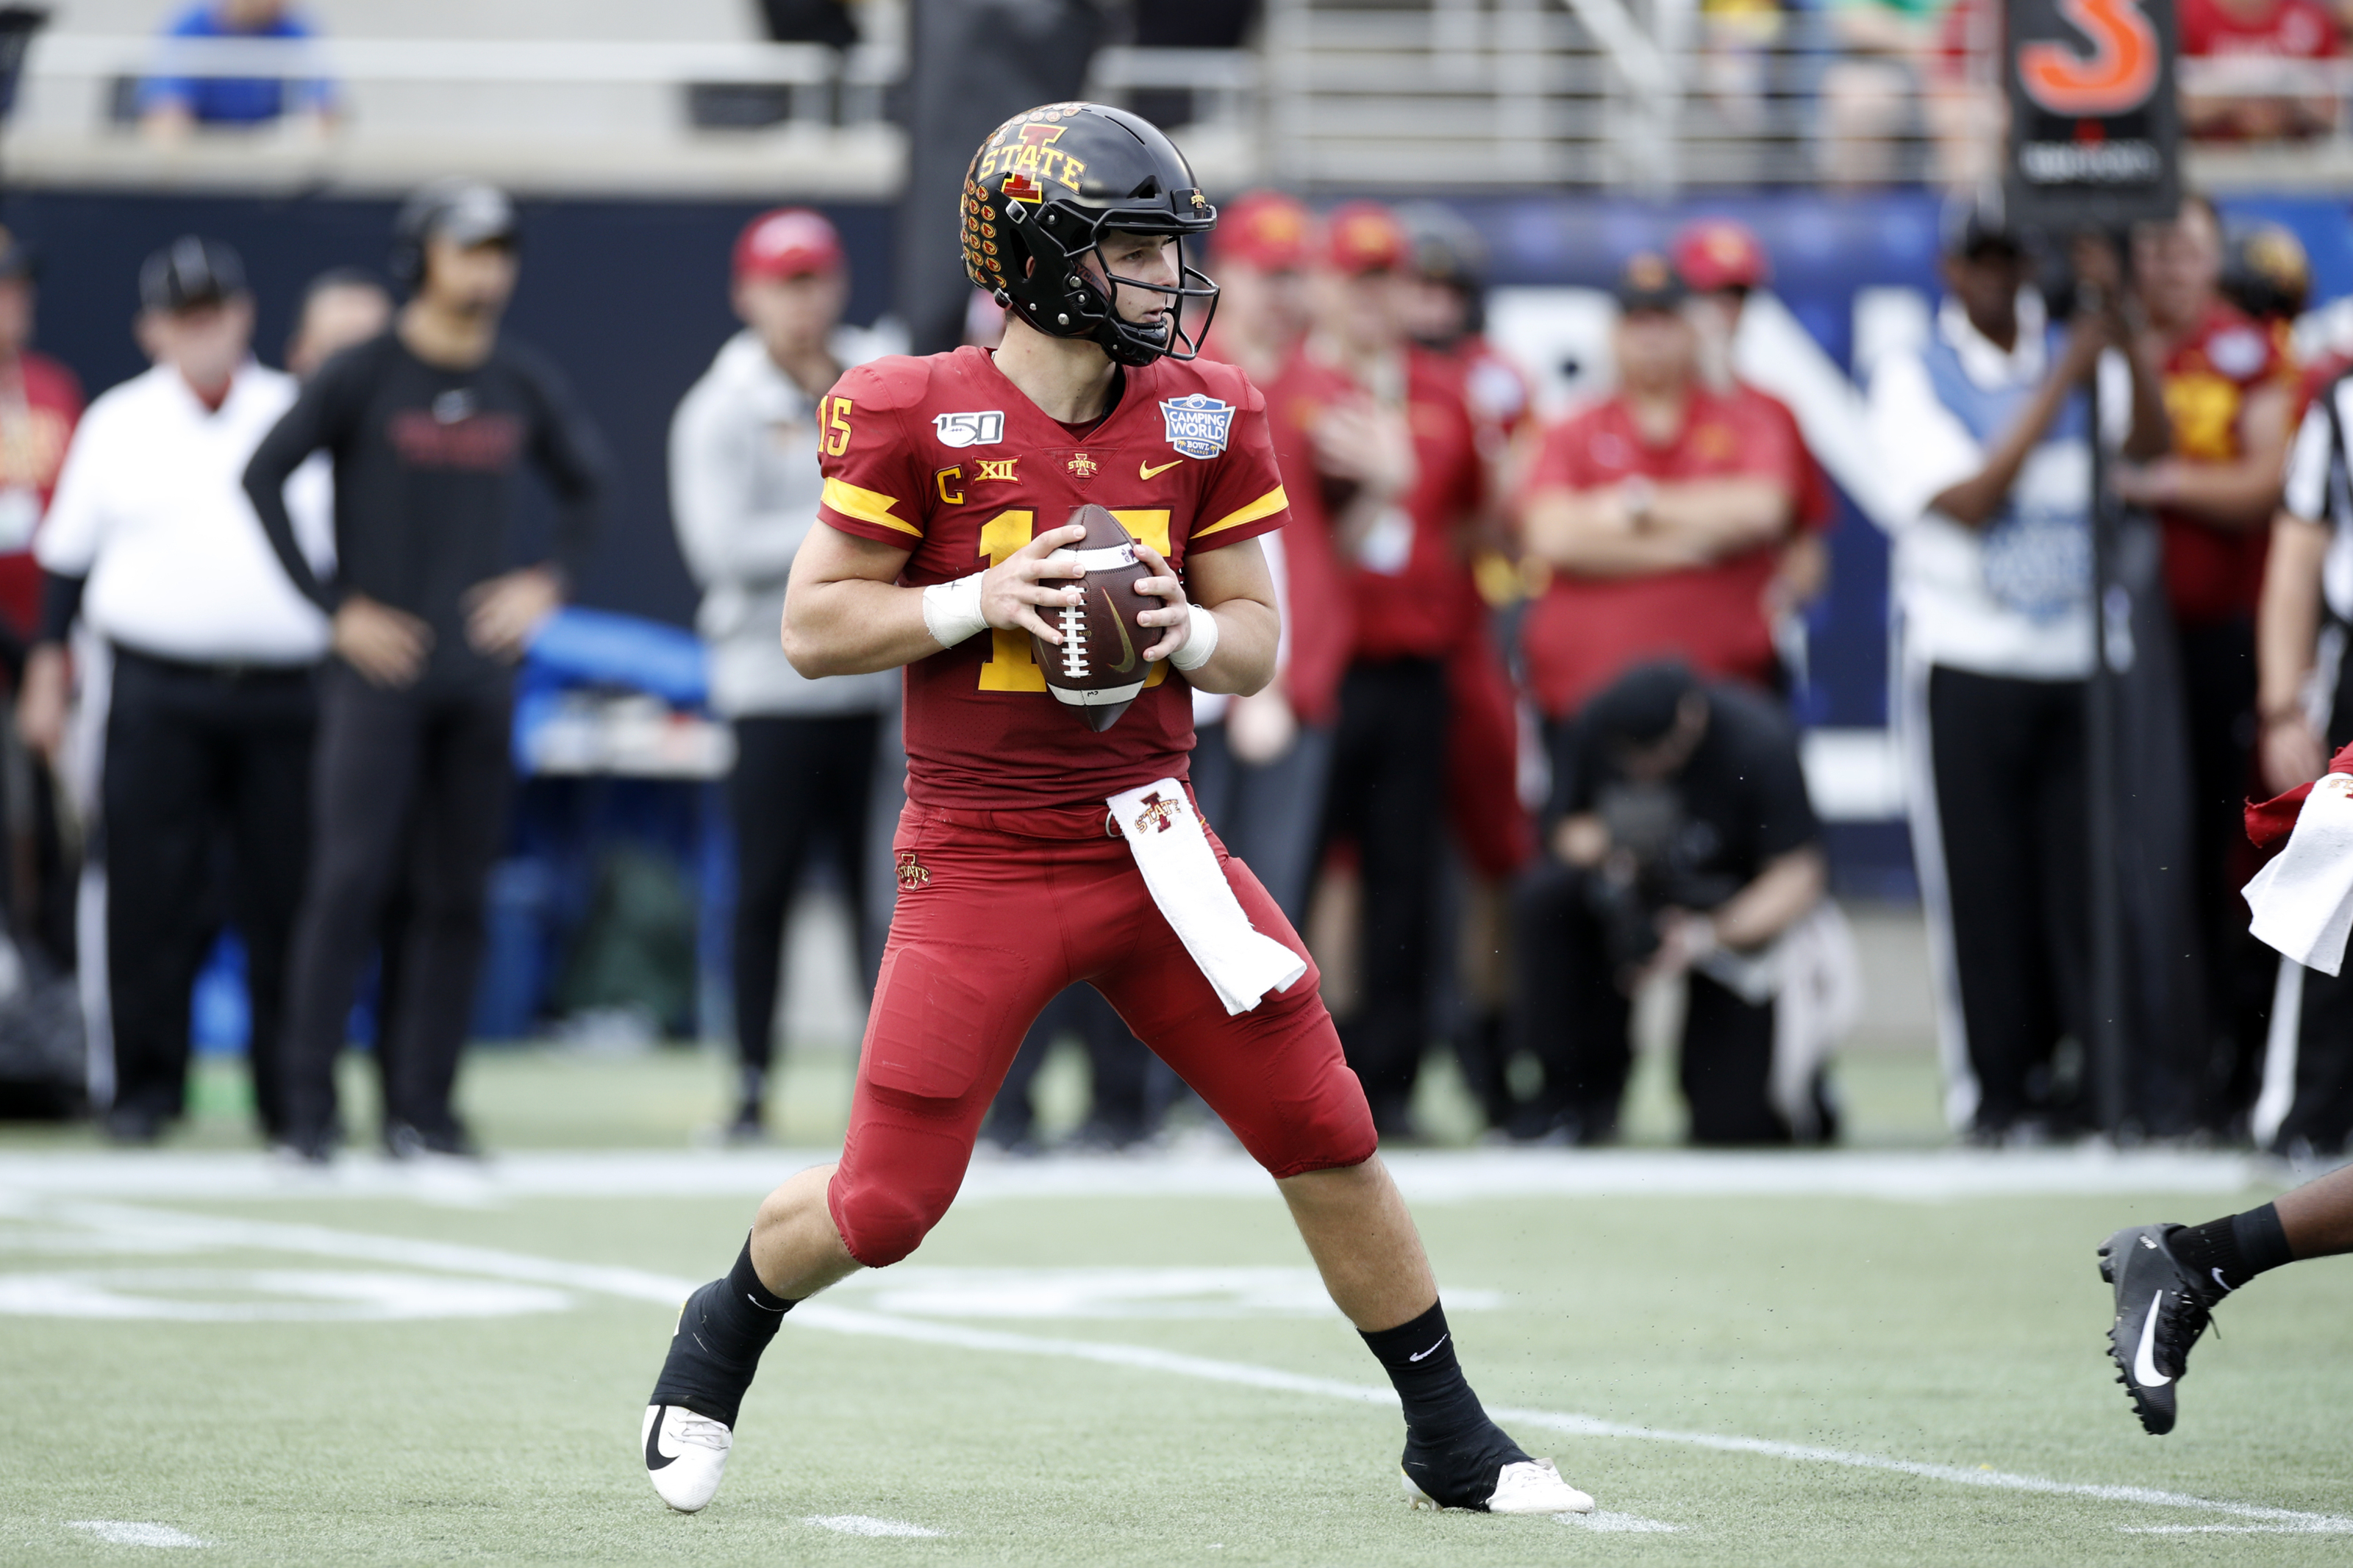 Iowa State Football: Why doesn't Brock Purdy get more national respect?